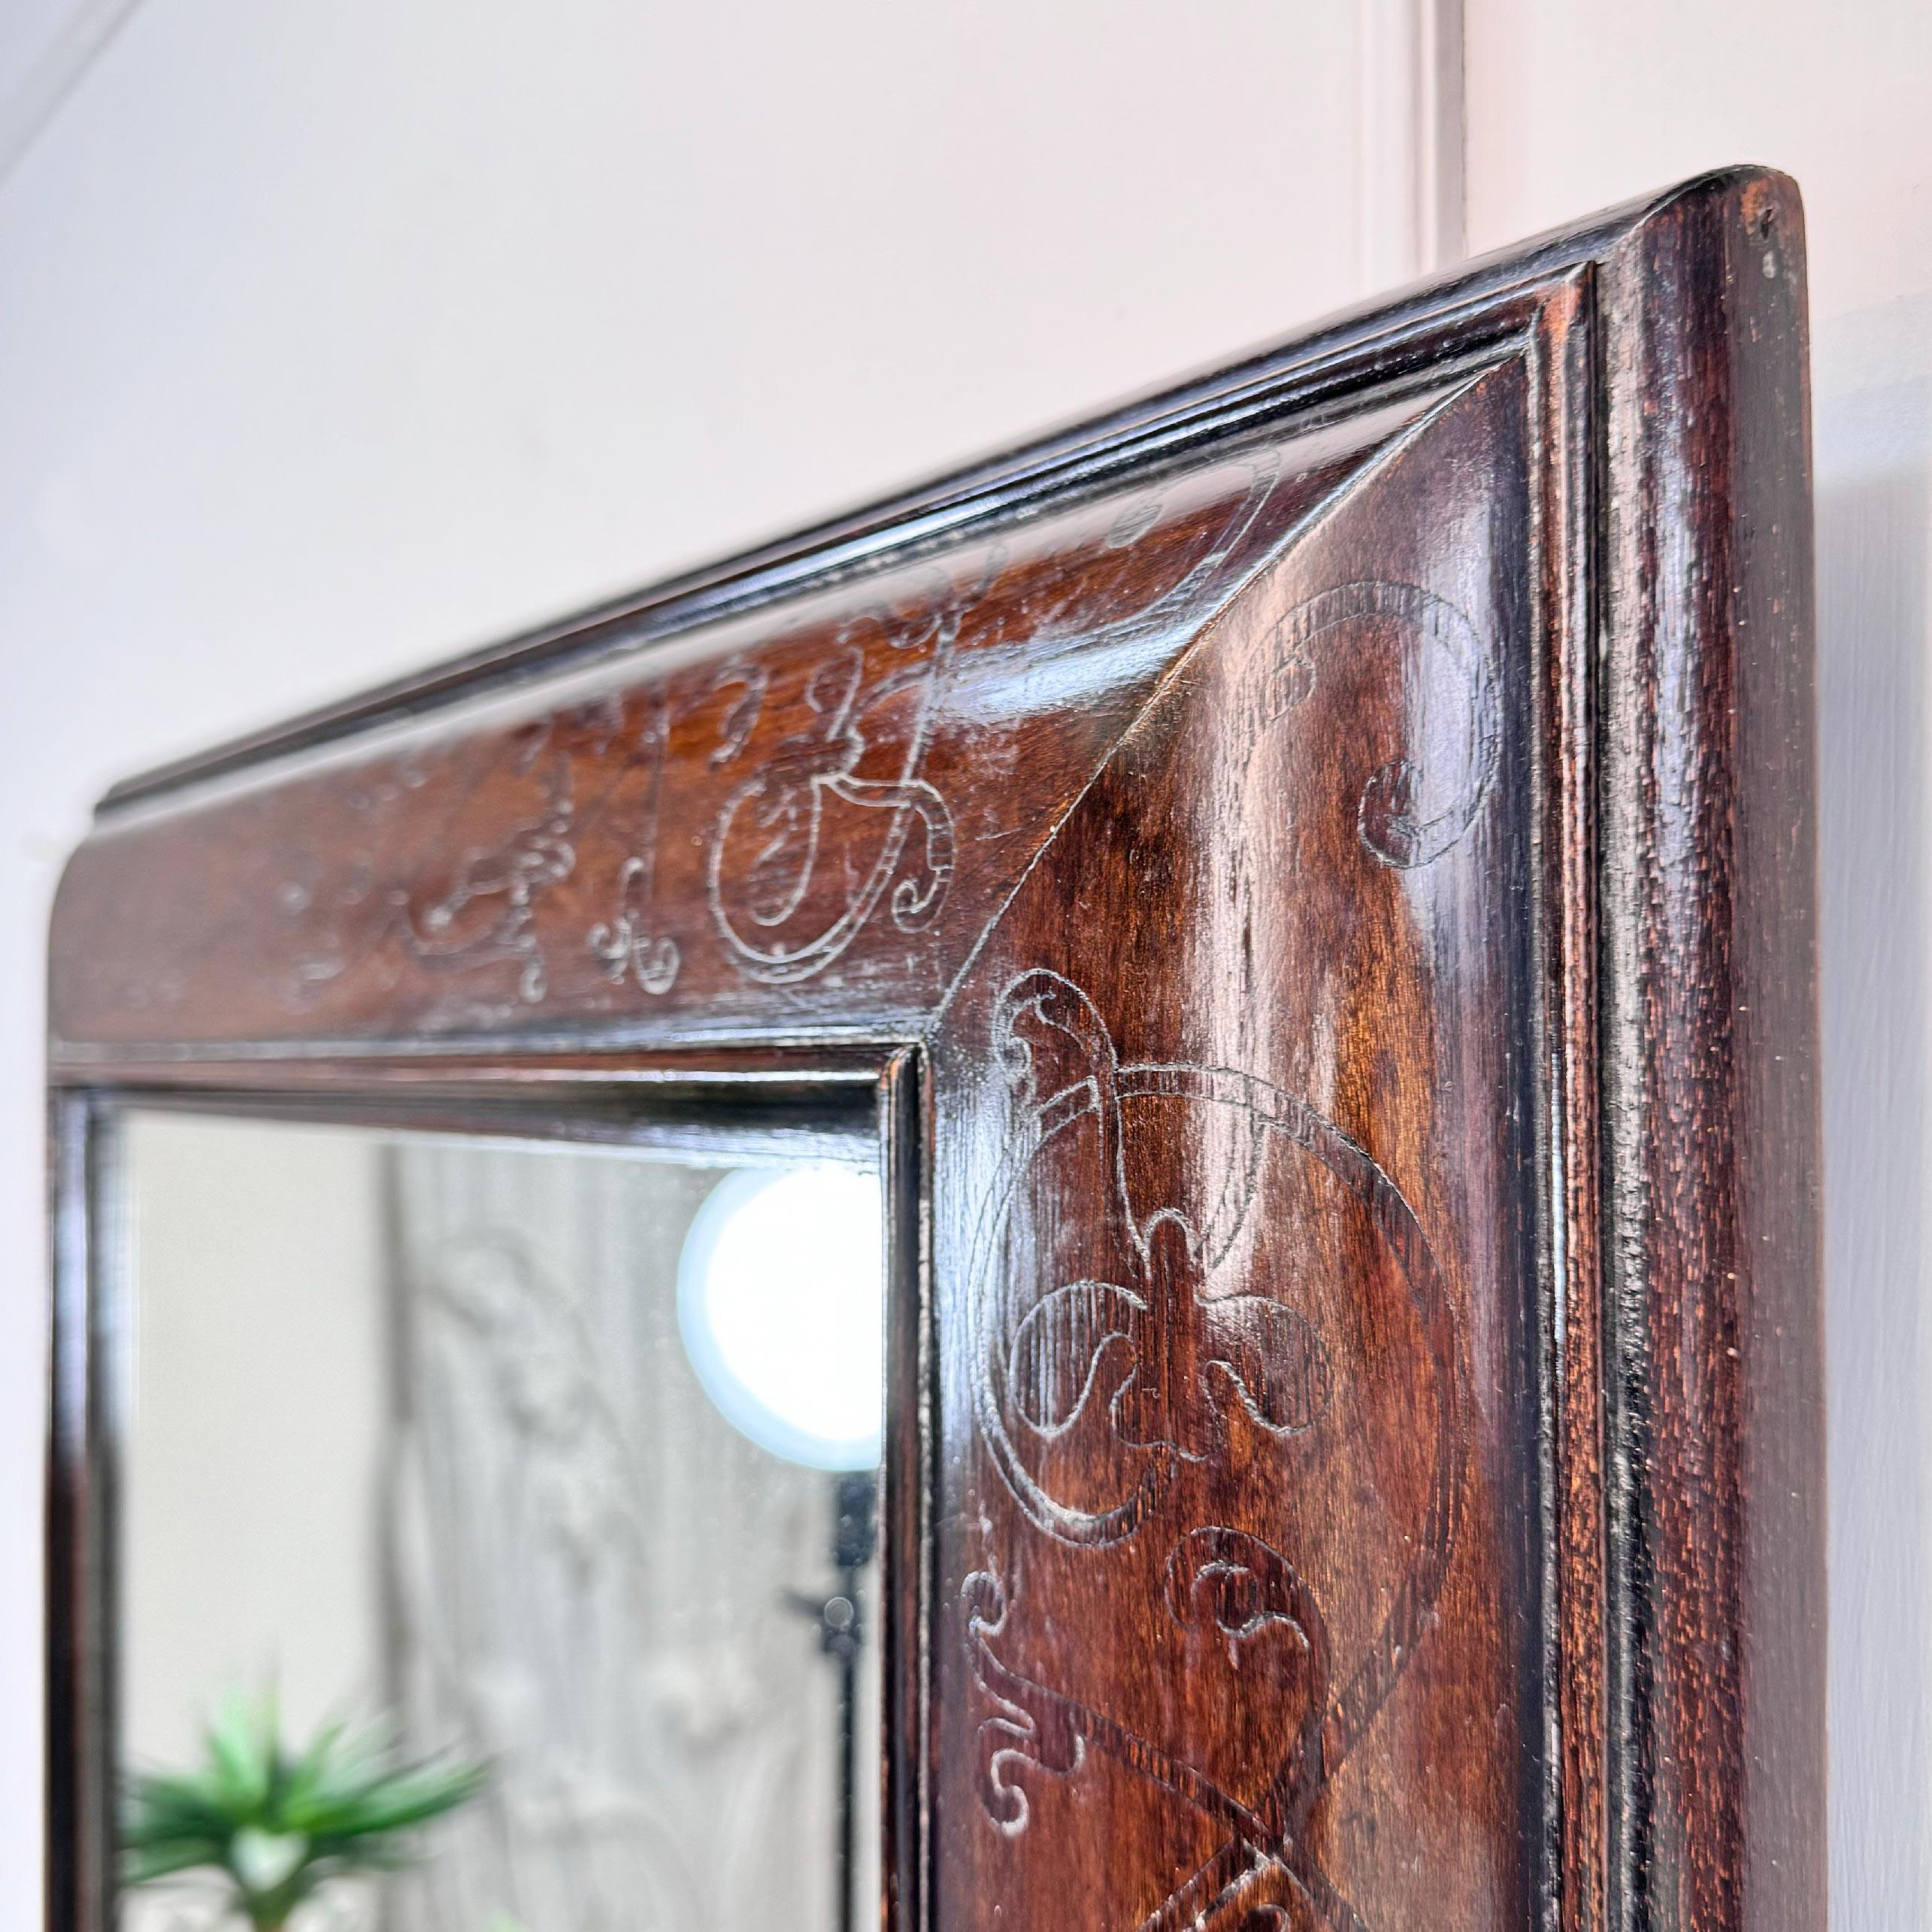 Exceptional 18th Century Marquetry Mirror in the William and Mary style For Sale 2